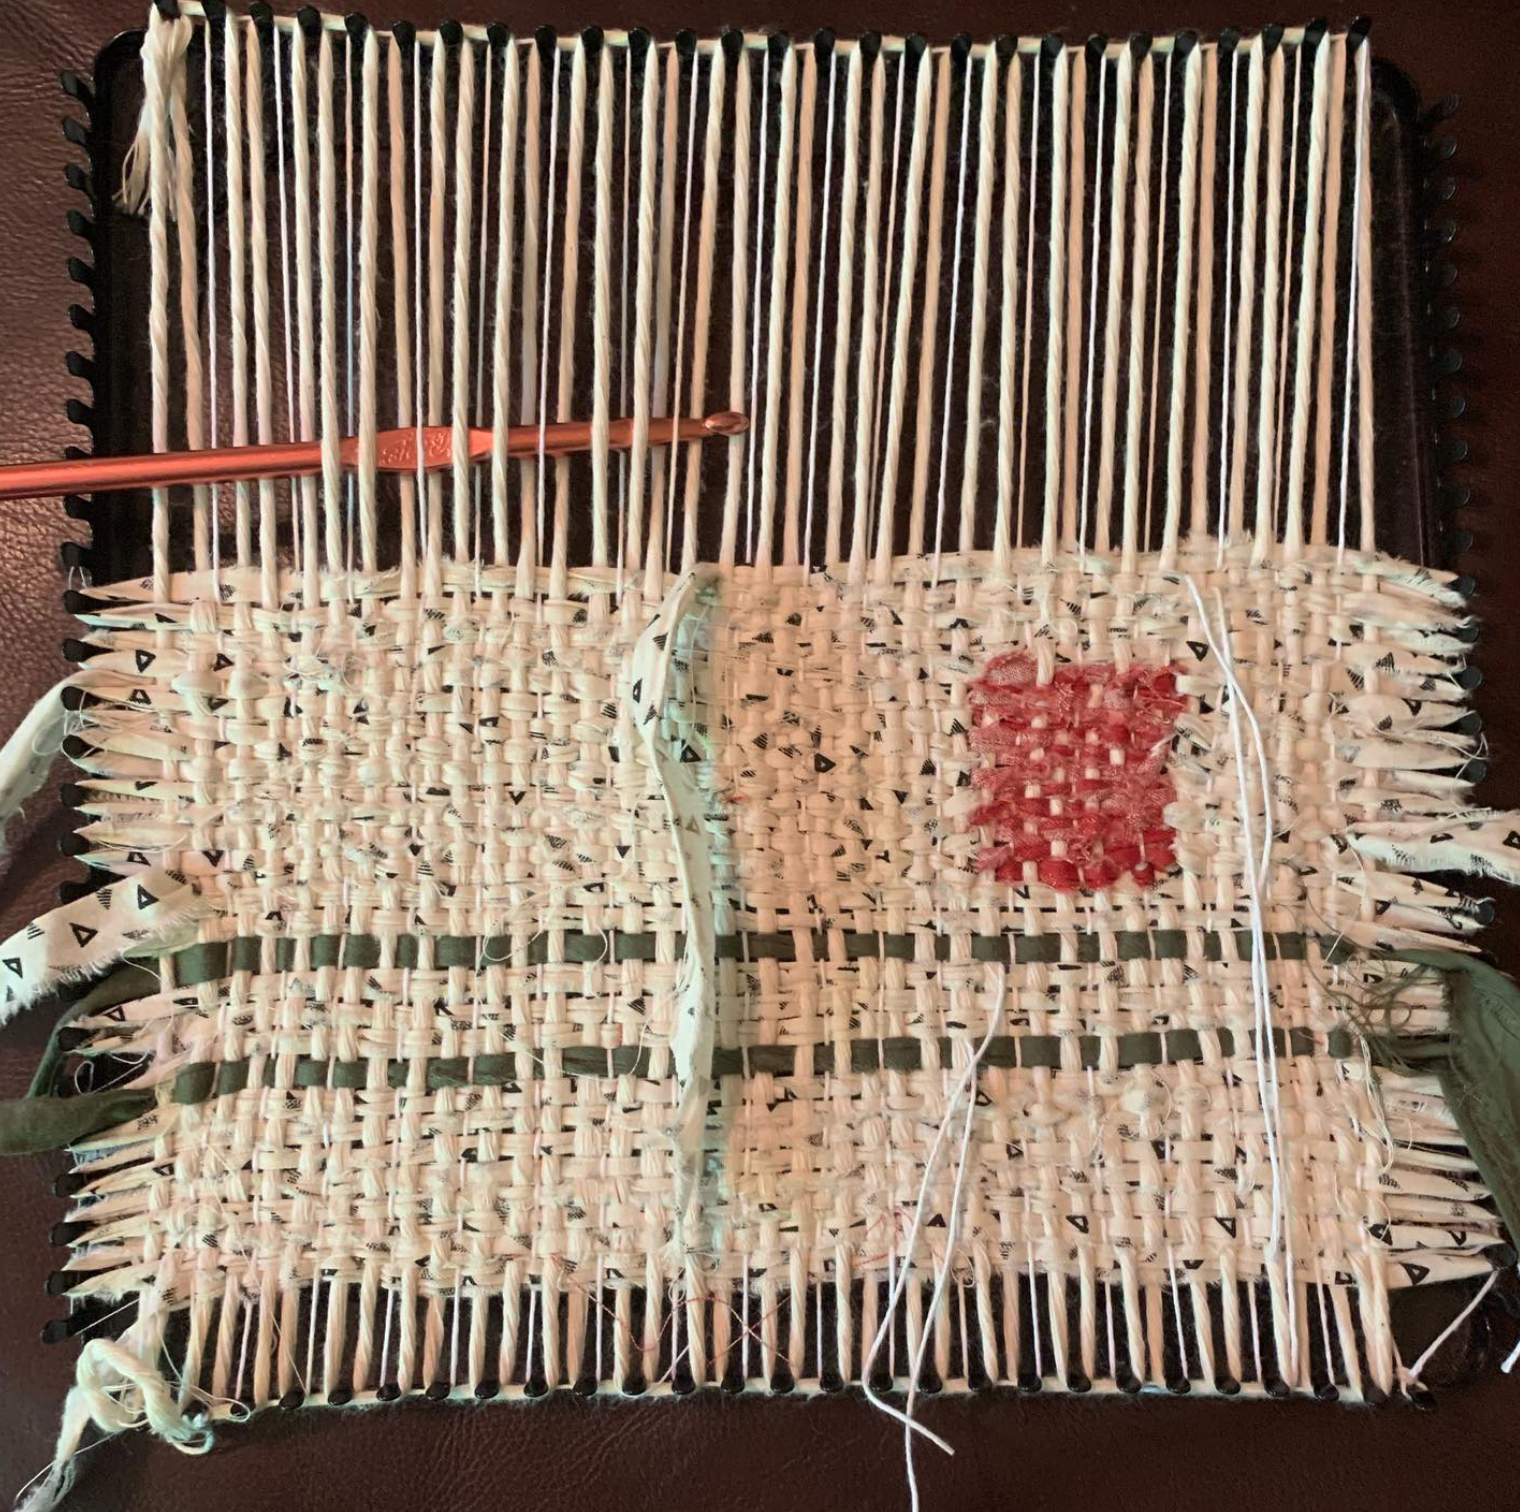 Beyond Potholders: using the potholder loom for weaving with yarn and more - Workshop With Suzanne Hokanson